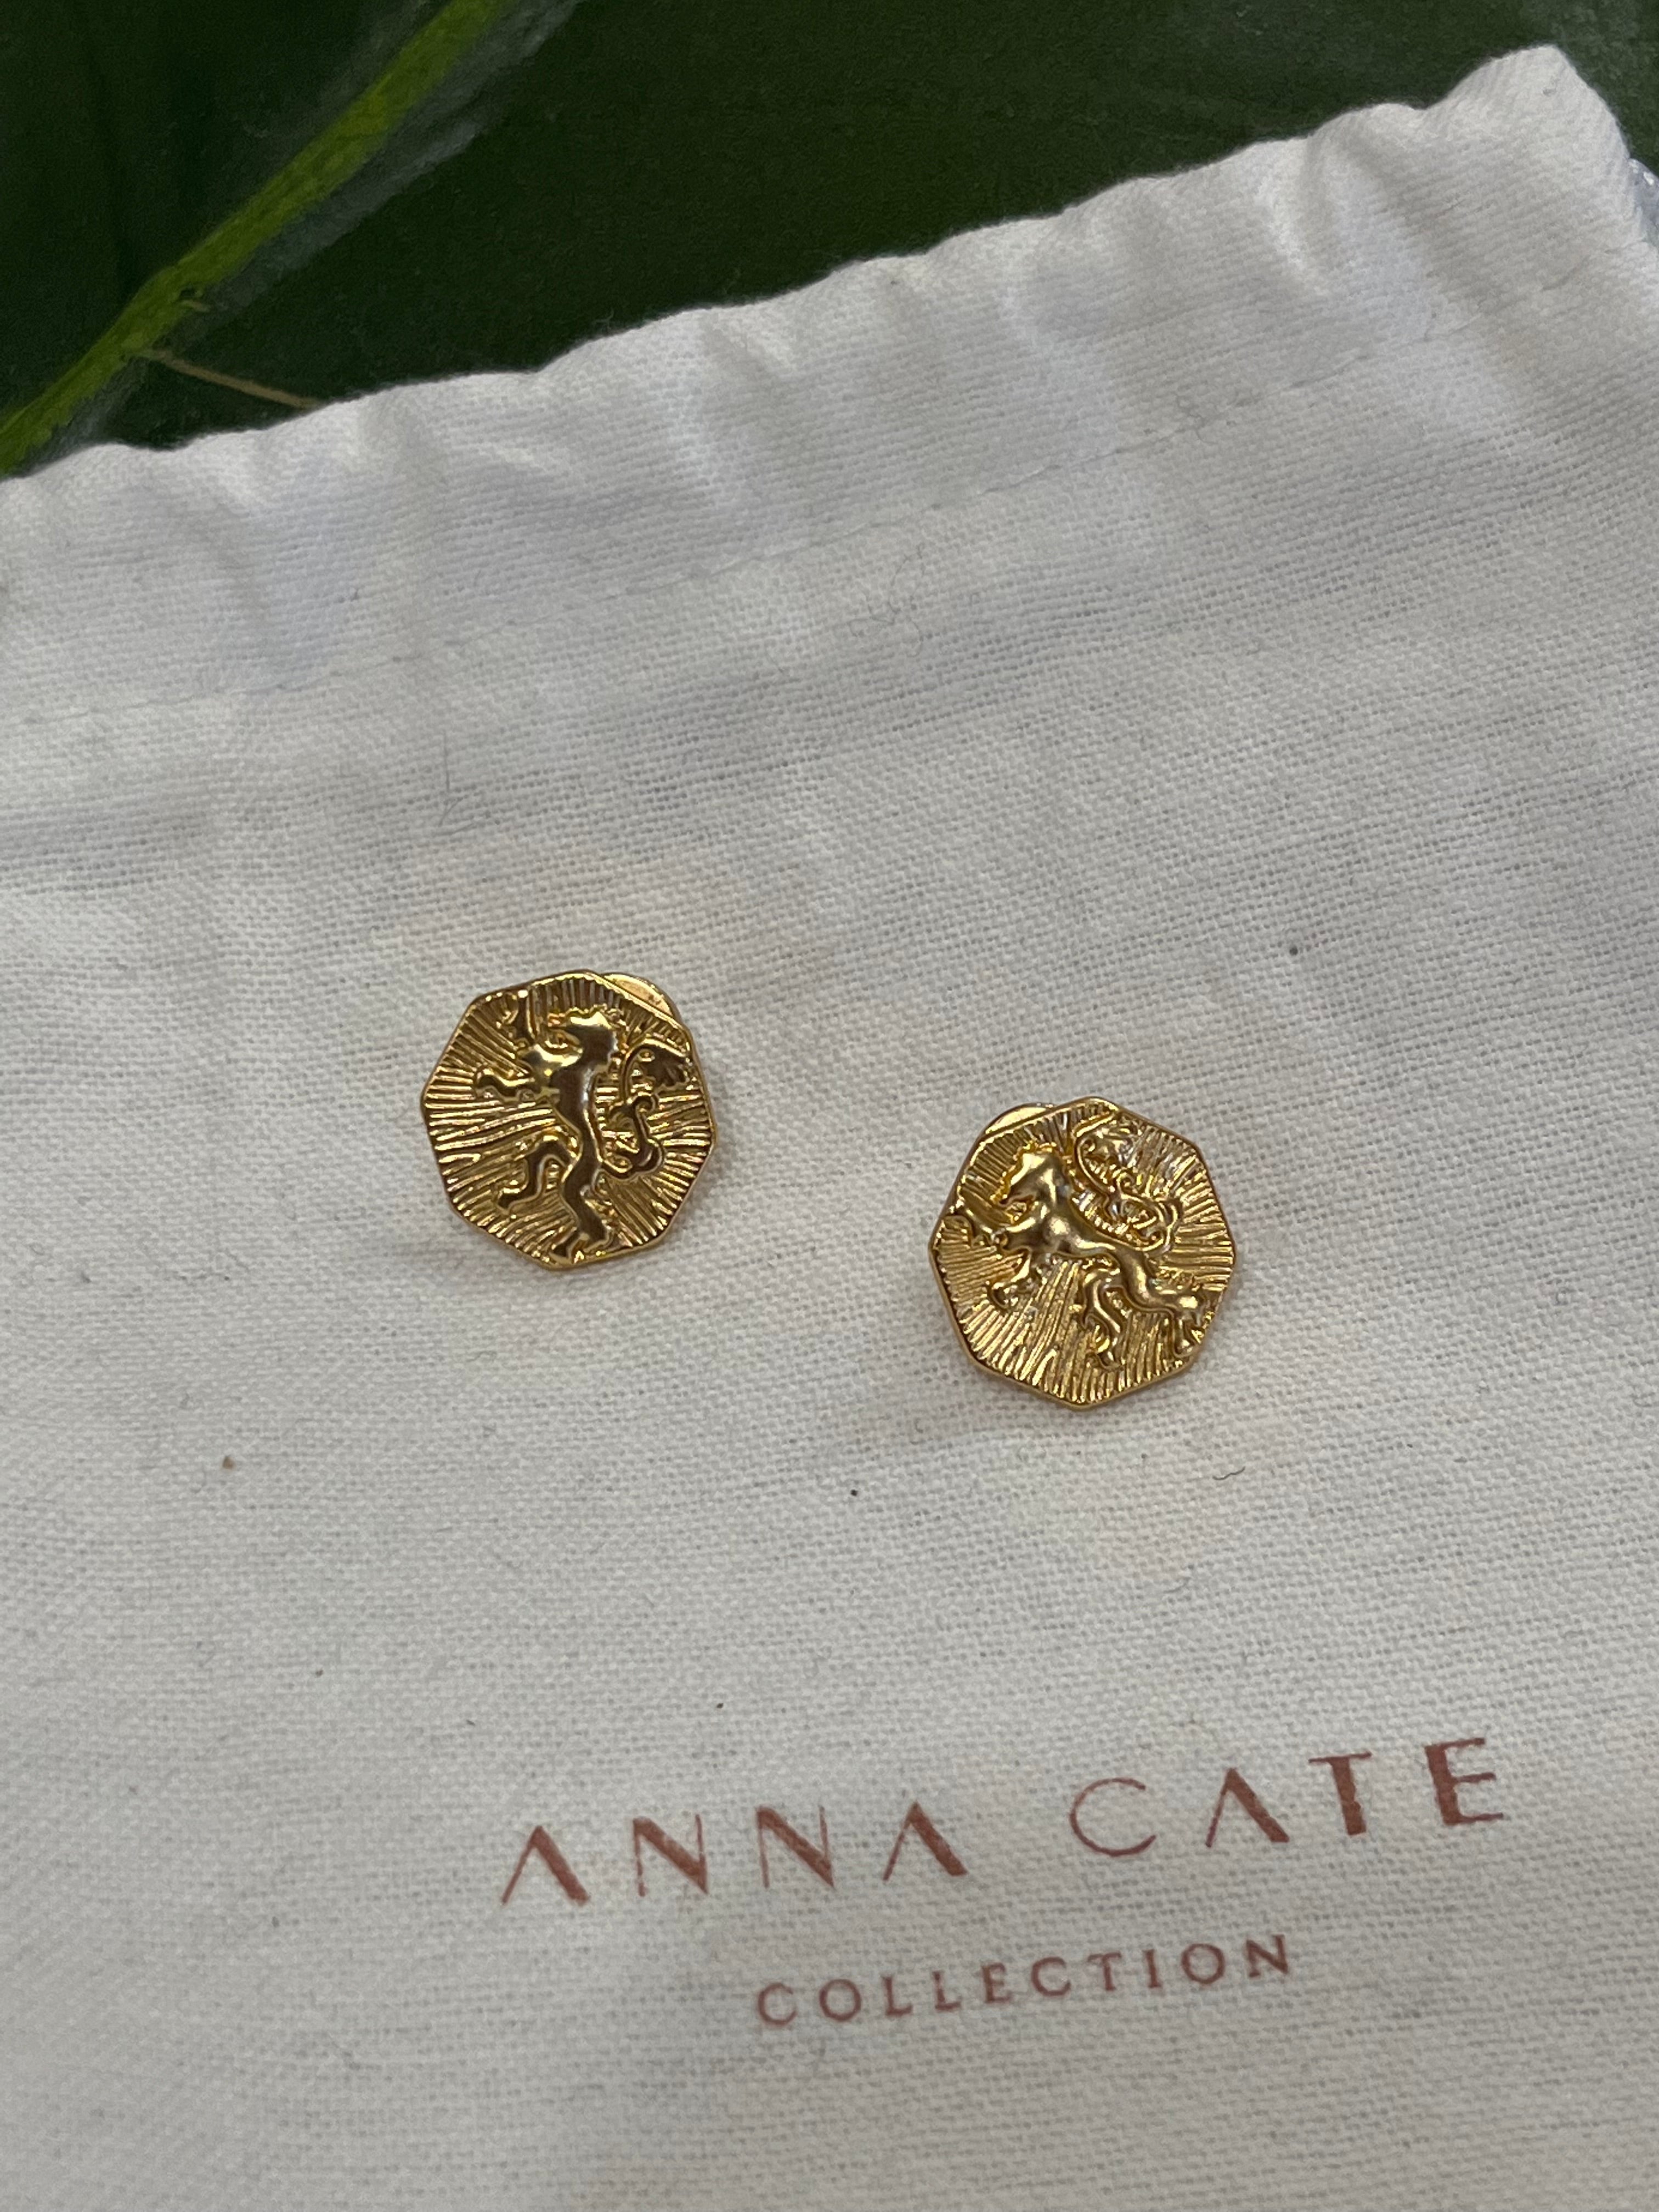 Anna Cate Earrings rededuct